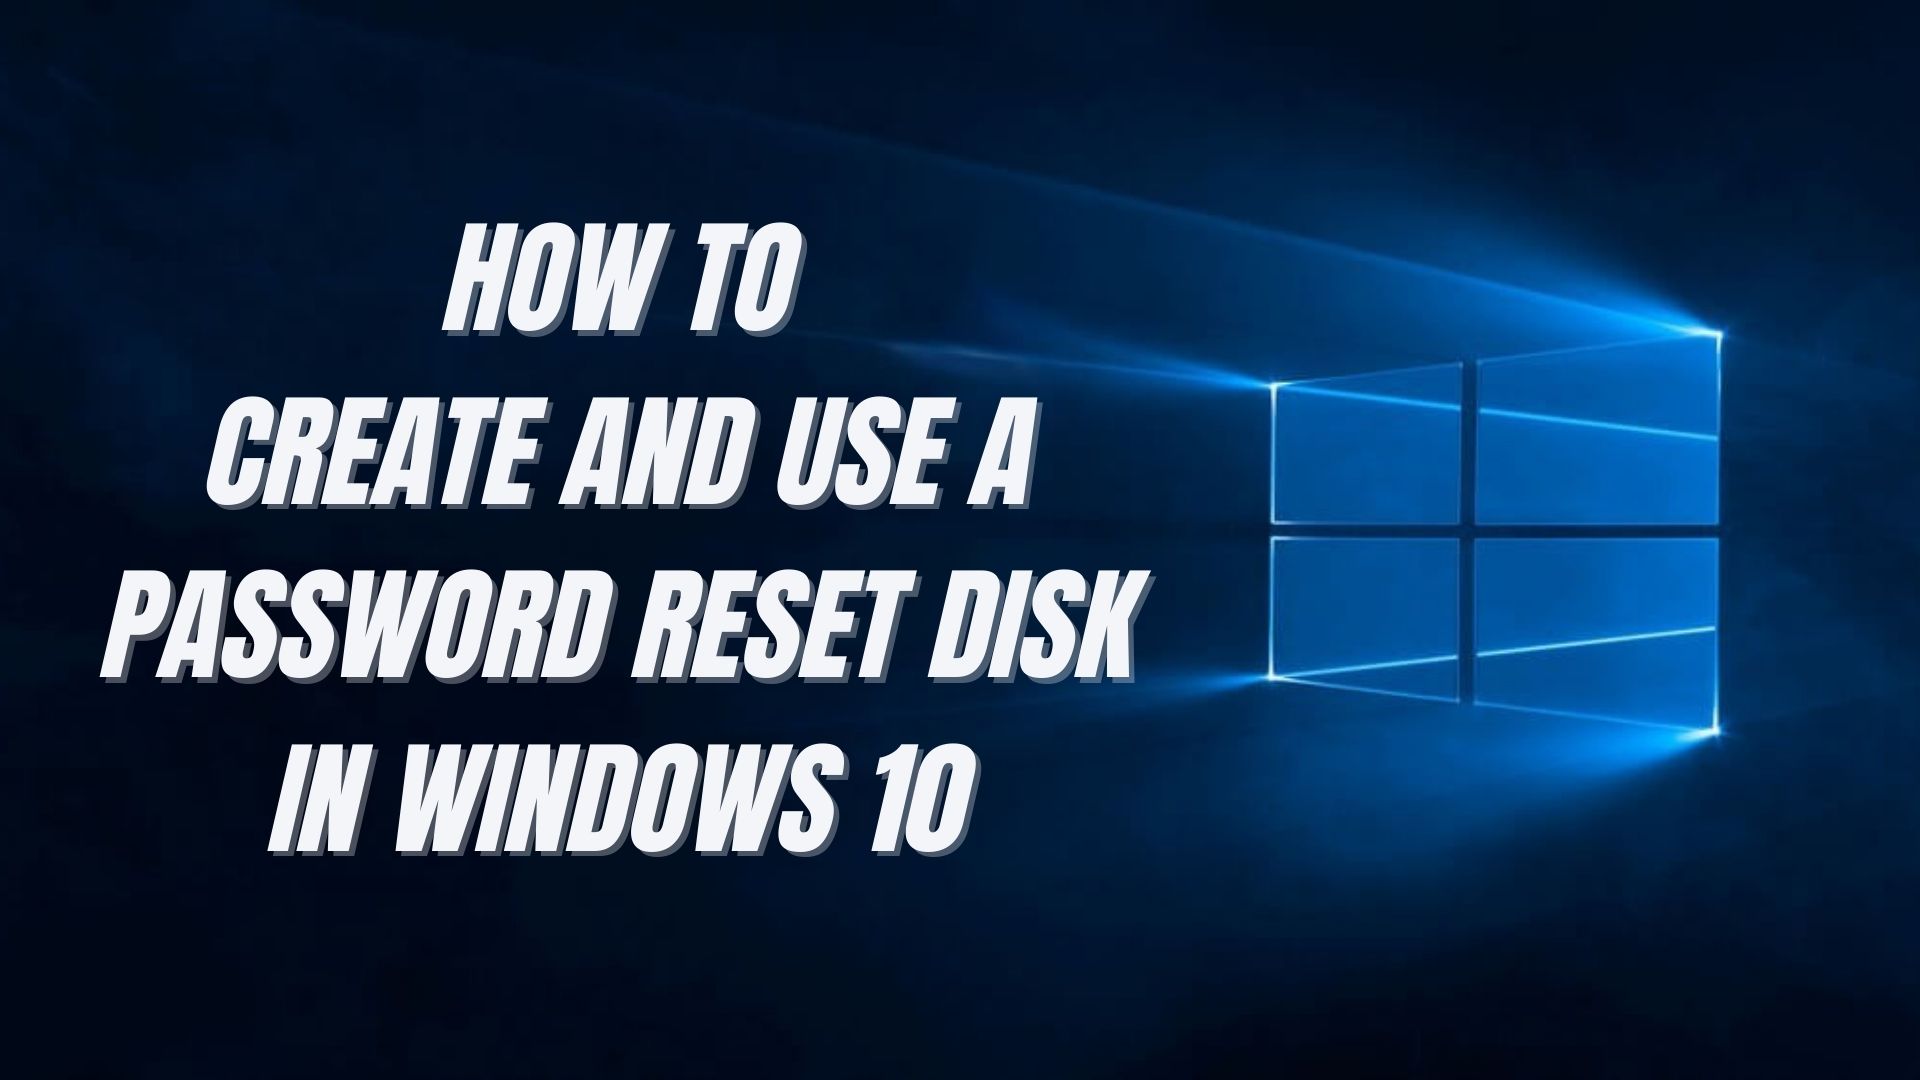 How to create and use a password reset disk in Windows 10